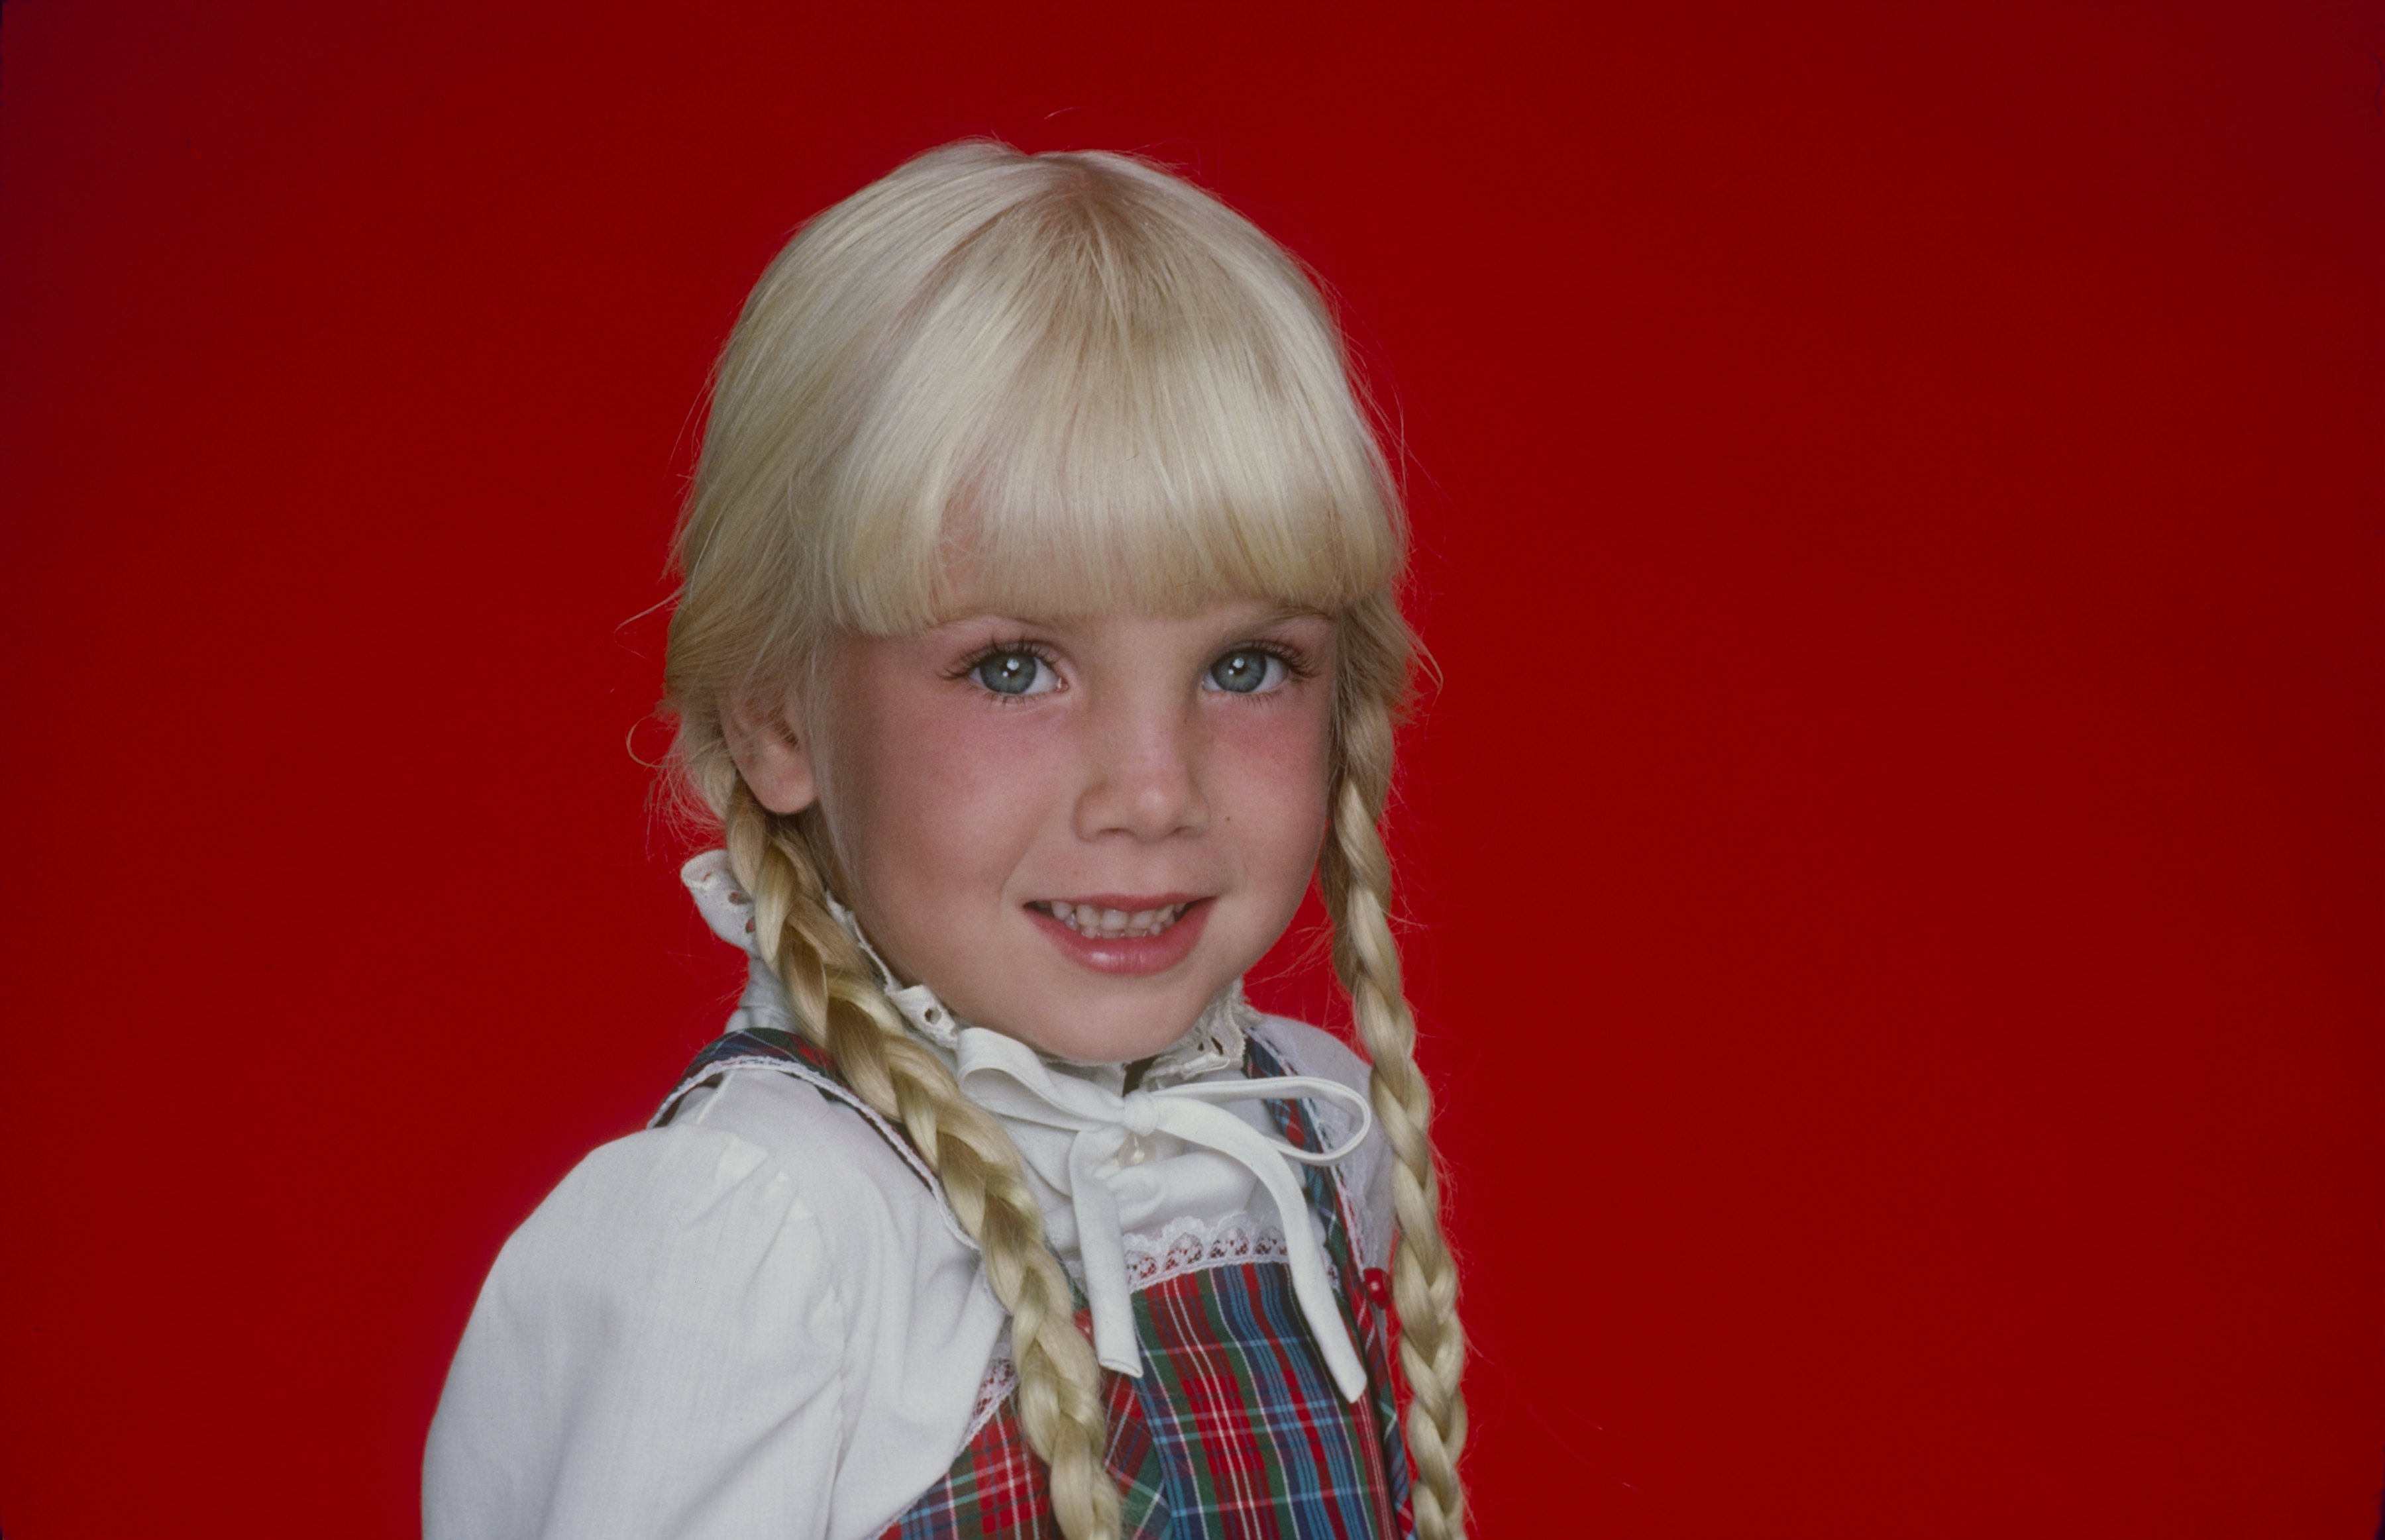 Heather O'Rourke as Heather Pfister in "Happy Days," circa 1982. | Source: Getty Images